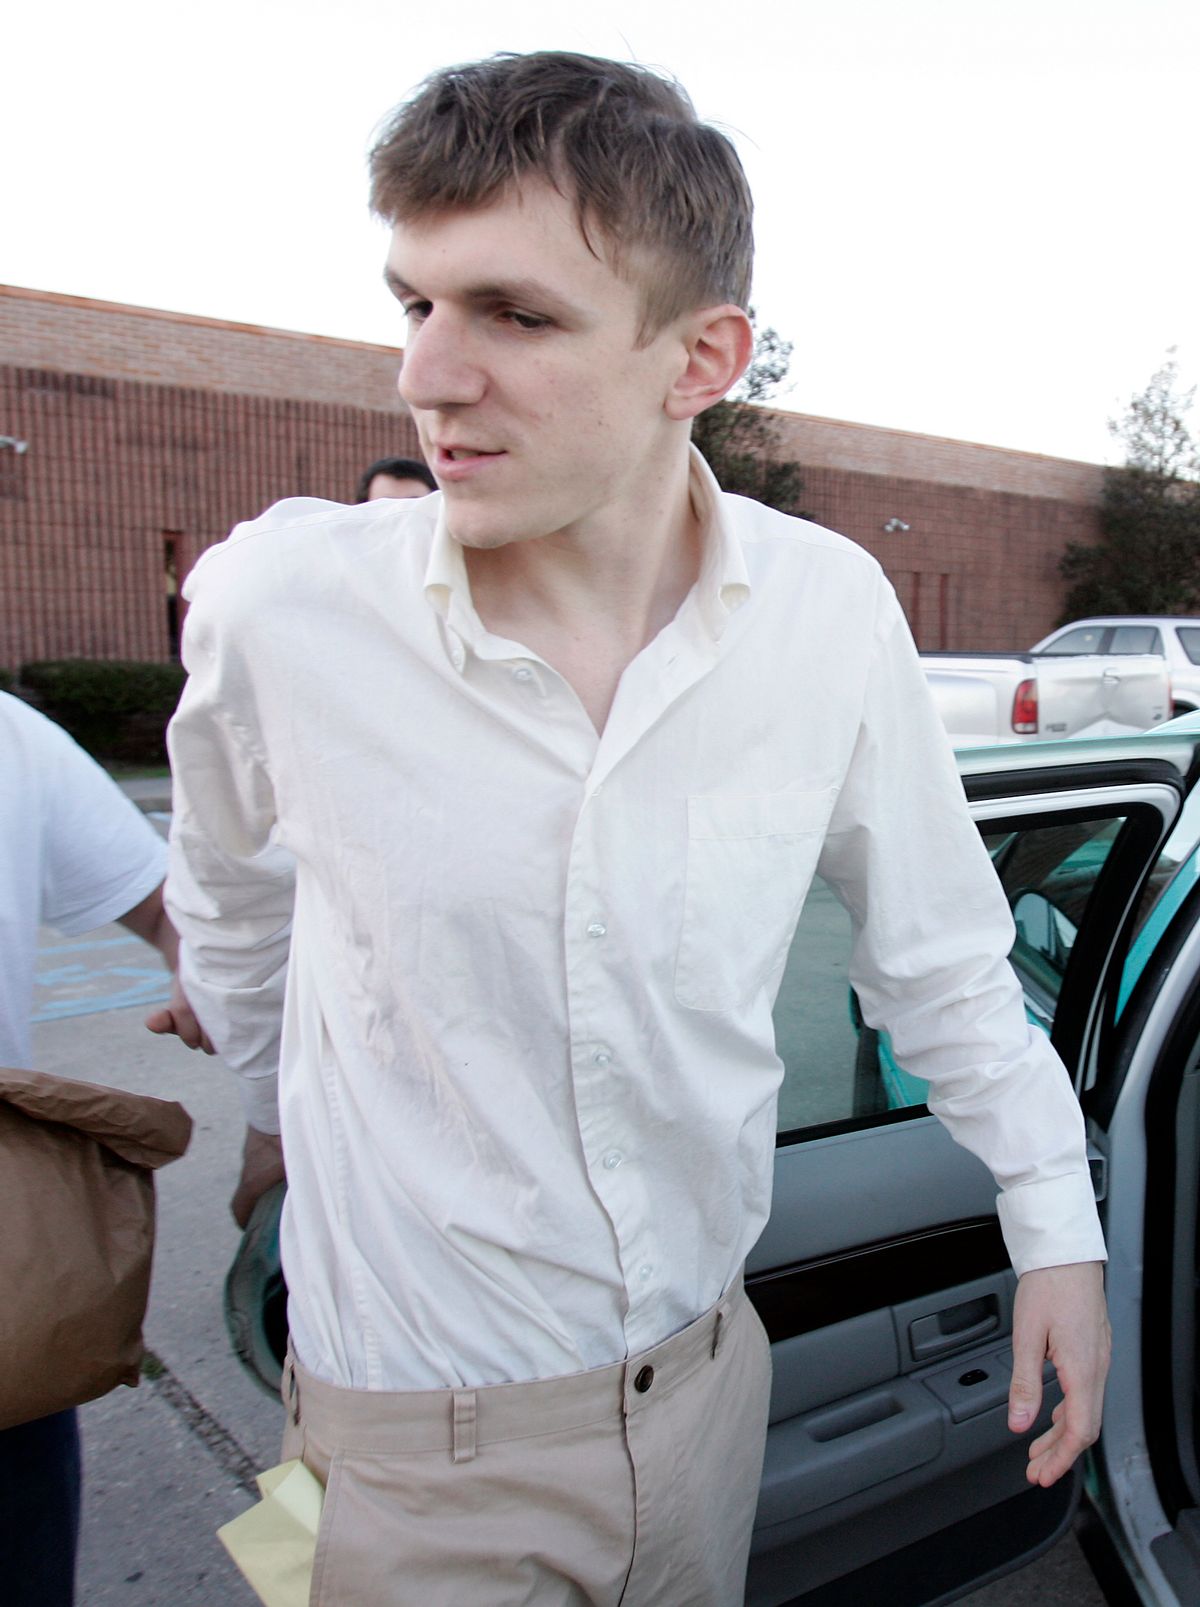 James O'Keefe speaks with the media while getting into a taxi cab after being released from the St. Bernard Parish jail in Chalmette, La., Tuesday, Jan. 26, 2010. O'Keefe, a conservative activist who posed as a pimp to target the community-organizing group ACORN, is one of four people arrested by the FBI and accused of trying to interfere with phones at Sen. Mary Landrieu's office in New Orleans. ()        (AP Photo/Patrick Semansky)